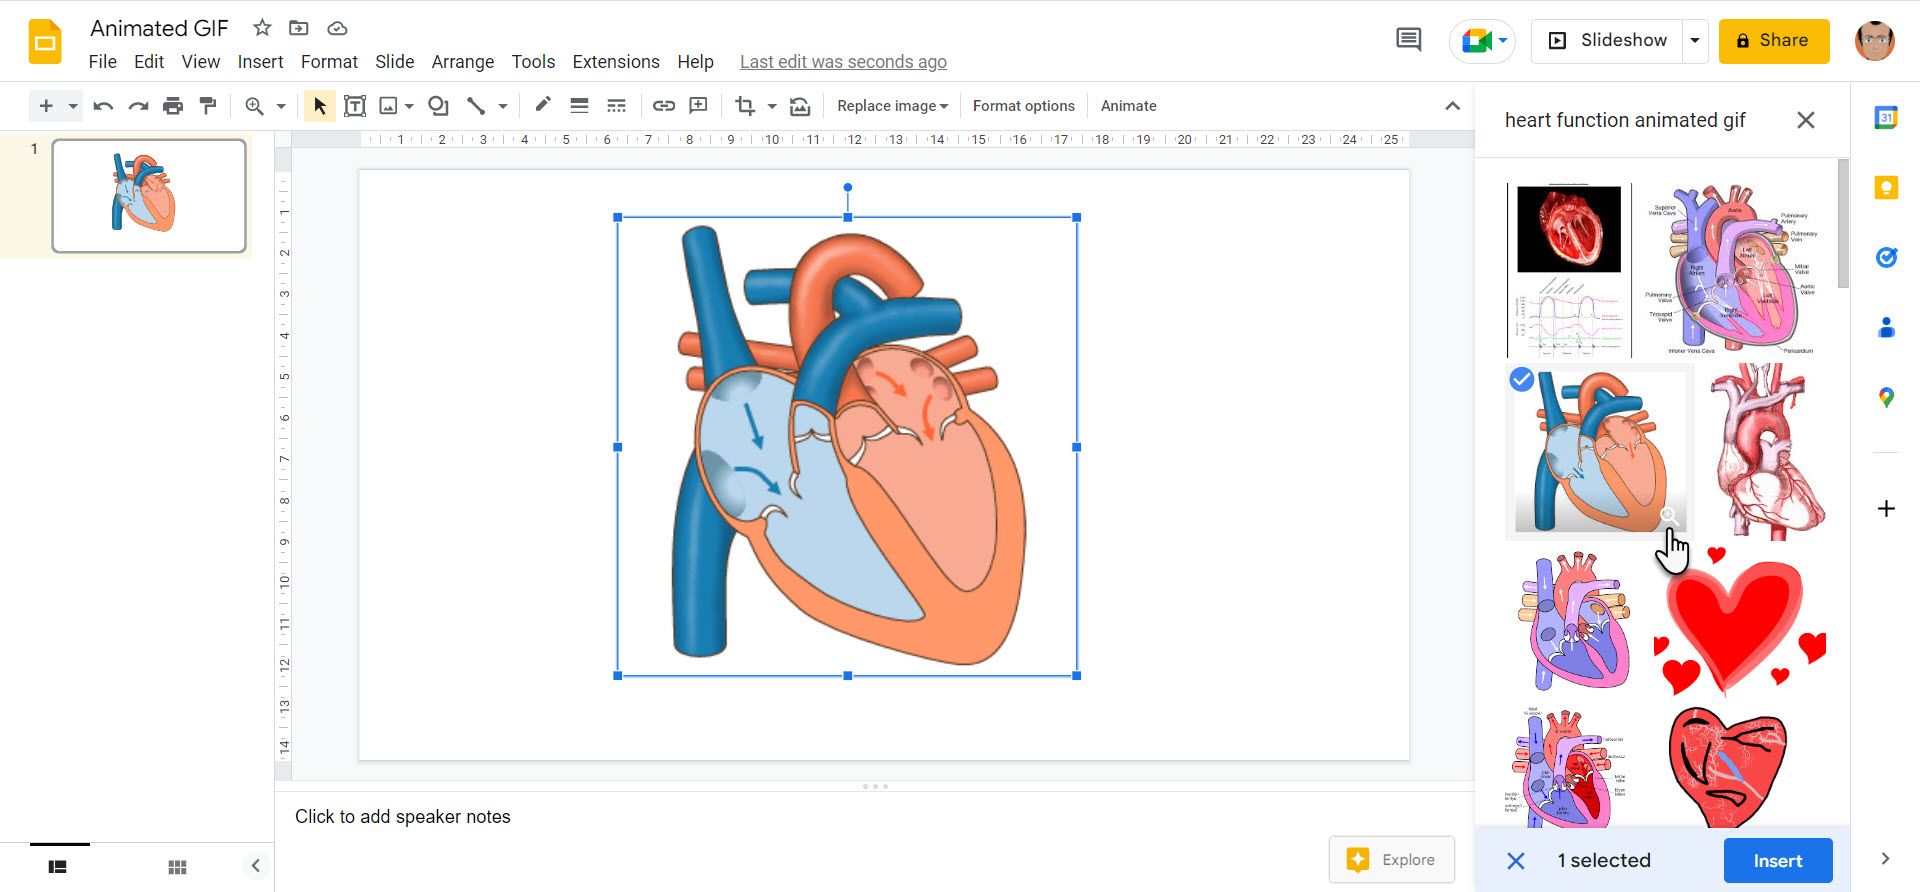 Use Google Search in Google Slides to insert an animated GIF